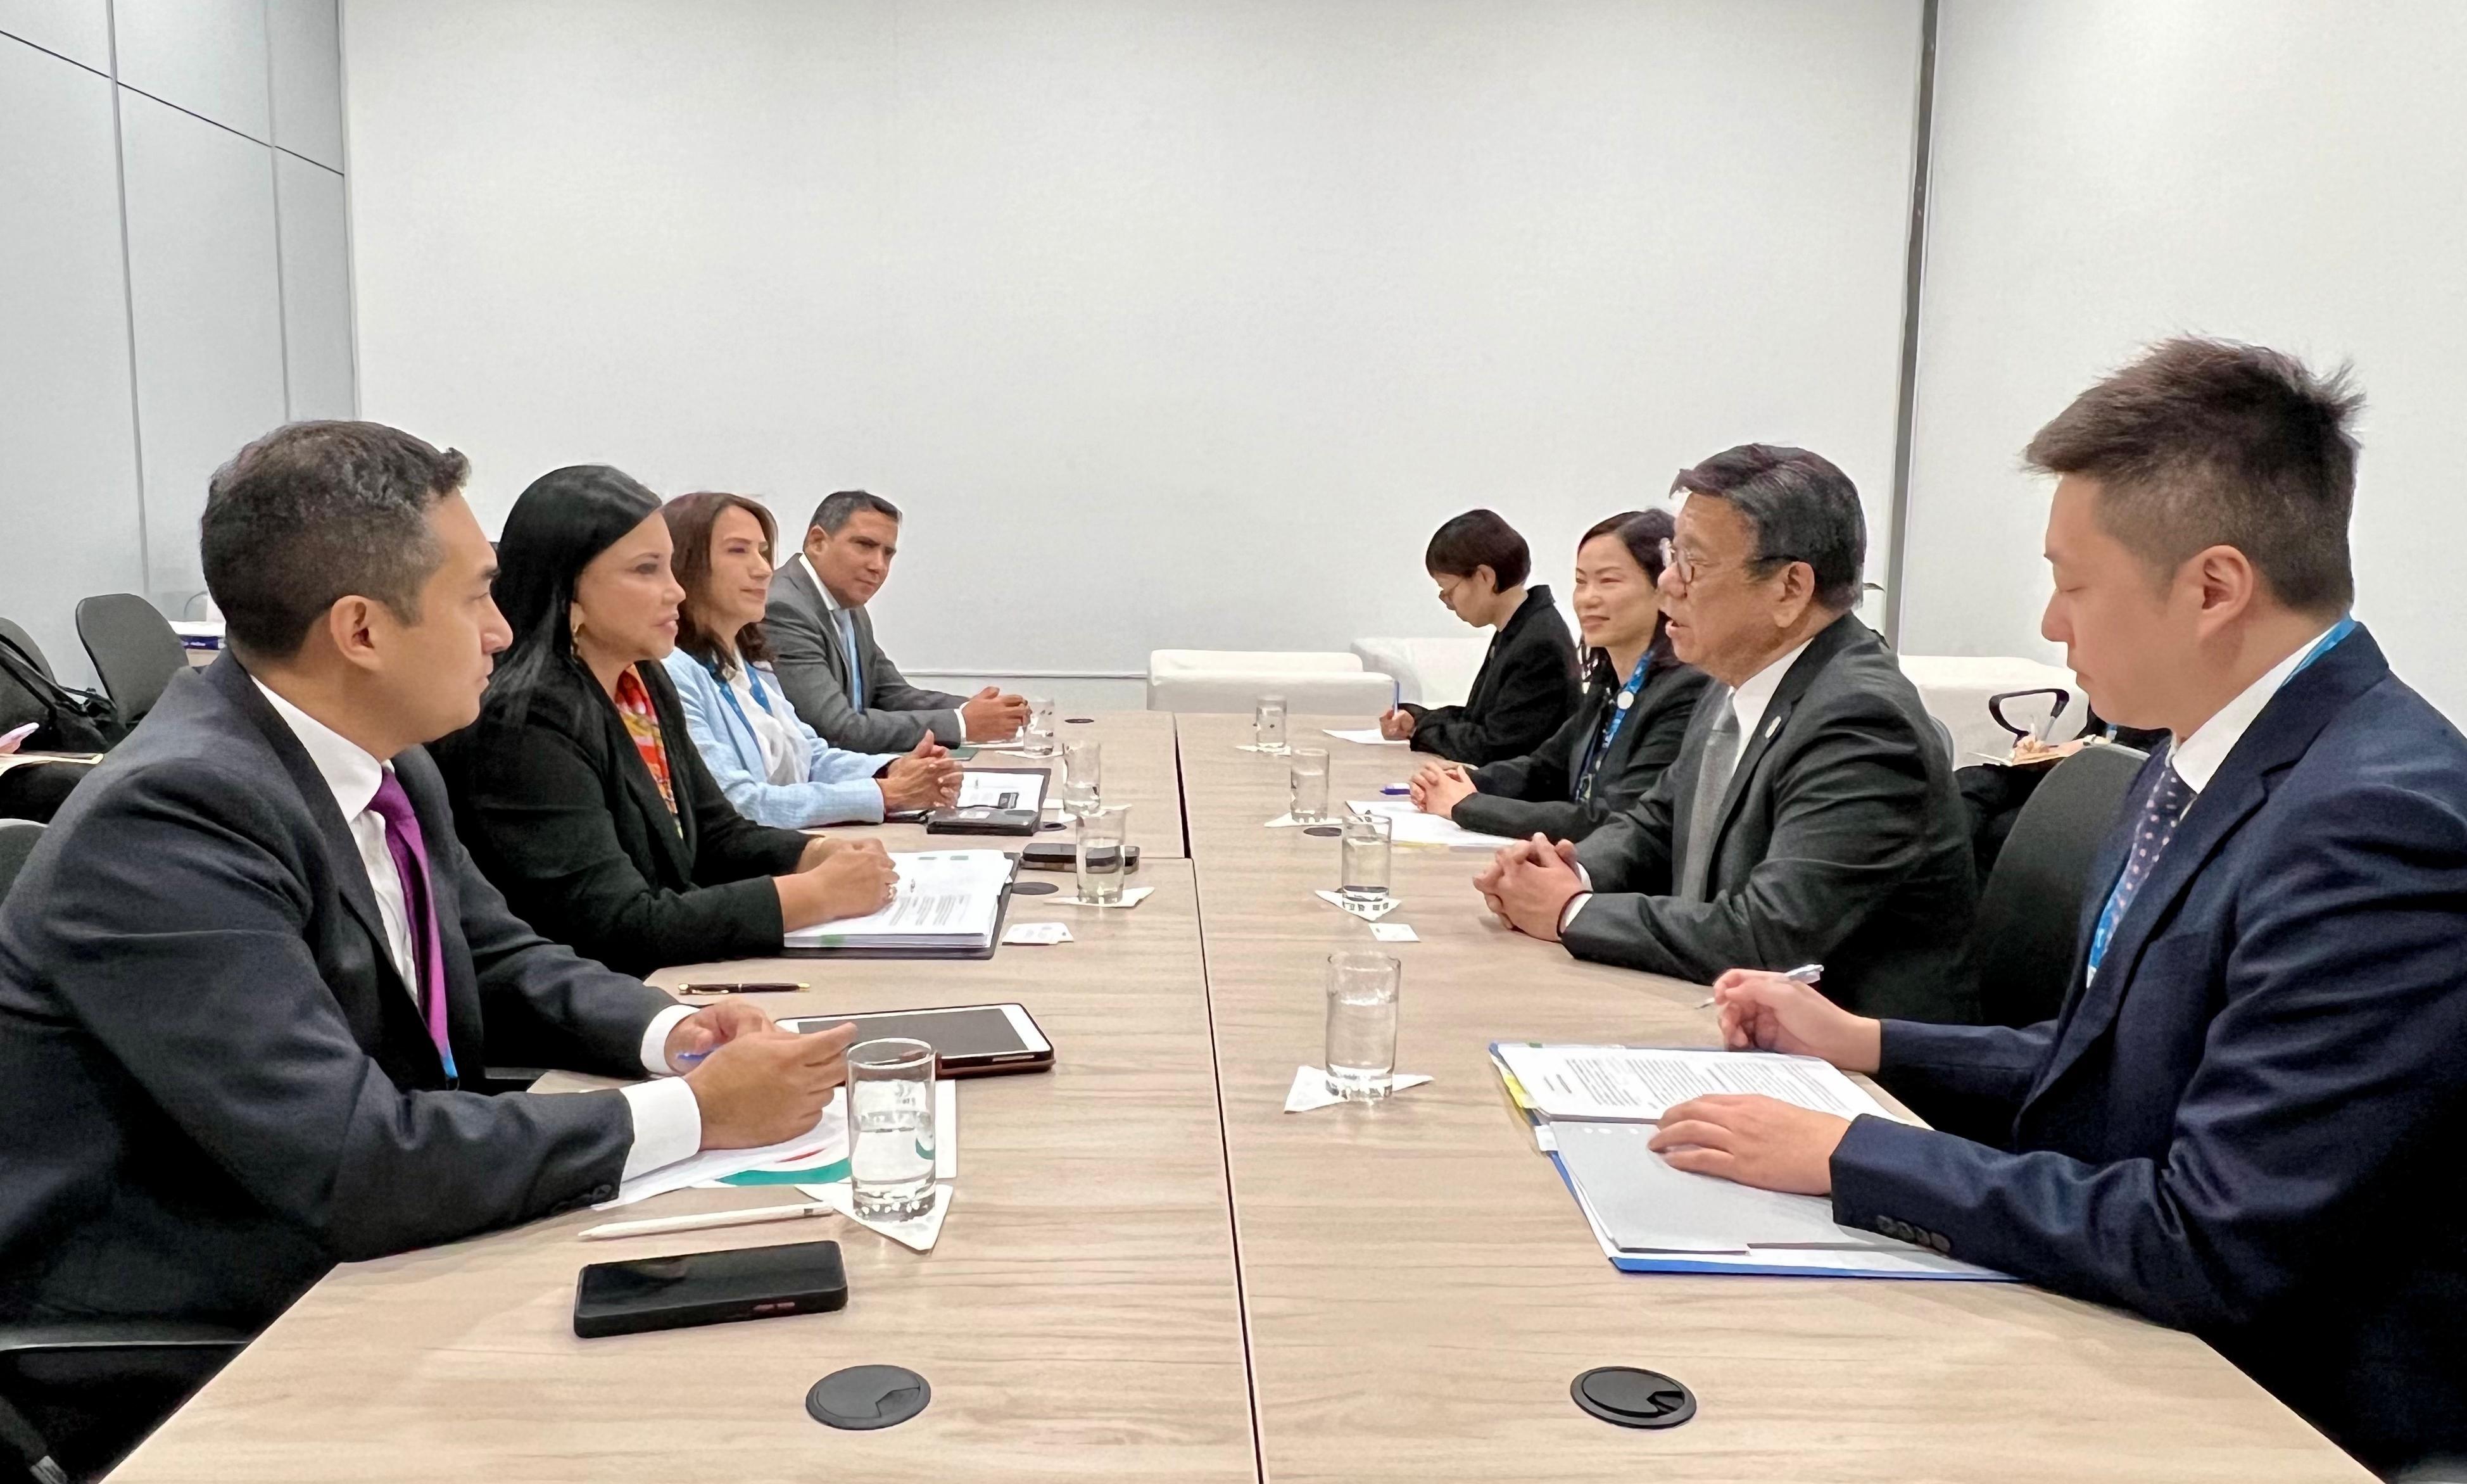 The Secretary for Commerce and Economic Development, Mr Algernon Yau (second right), today (May 16, Arequipa time) met with the Minister of Foreign Trade and Tourism of Peru, Ms Elizabeth Galdo Marín (second left), and jointly announced the substantial conclusion of negotiations of the free trade agreement between Hong Kong and Peru on the sidelines of the Asia-Pacific Economic Cooperation Ministers Responsible for Trade Meeting in Arequipa, Peru.
